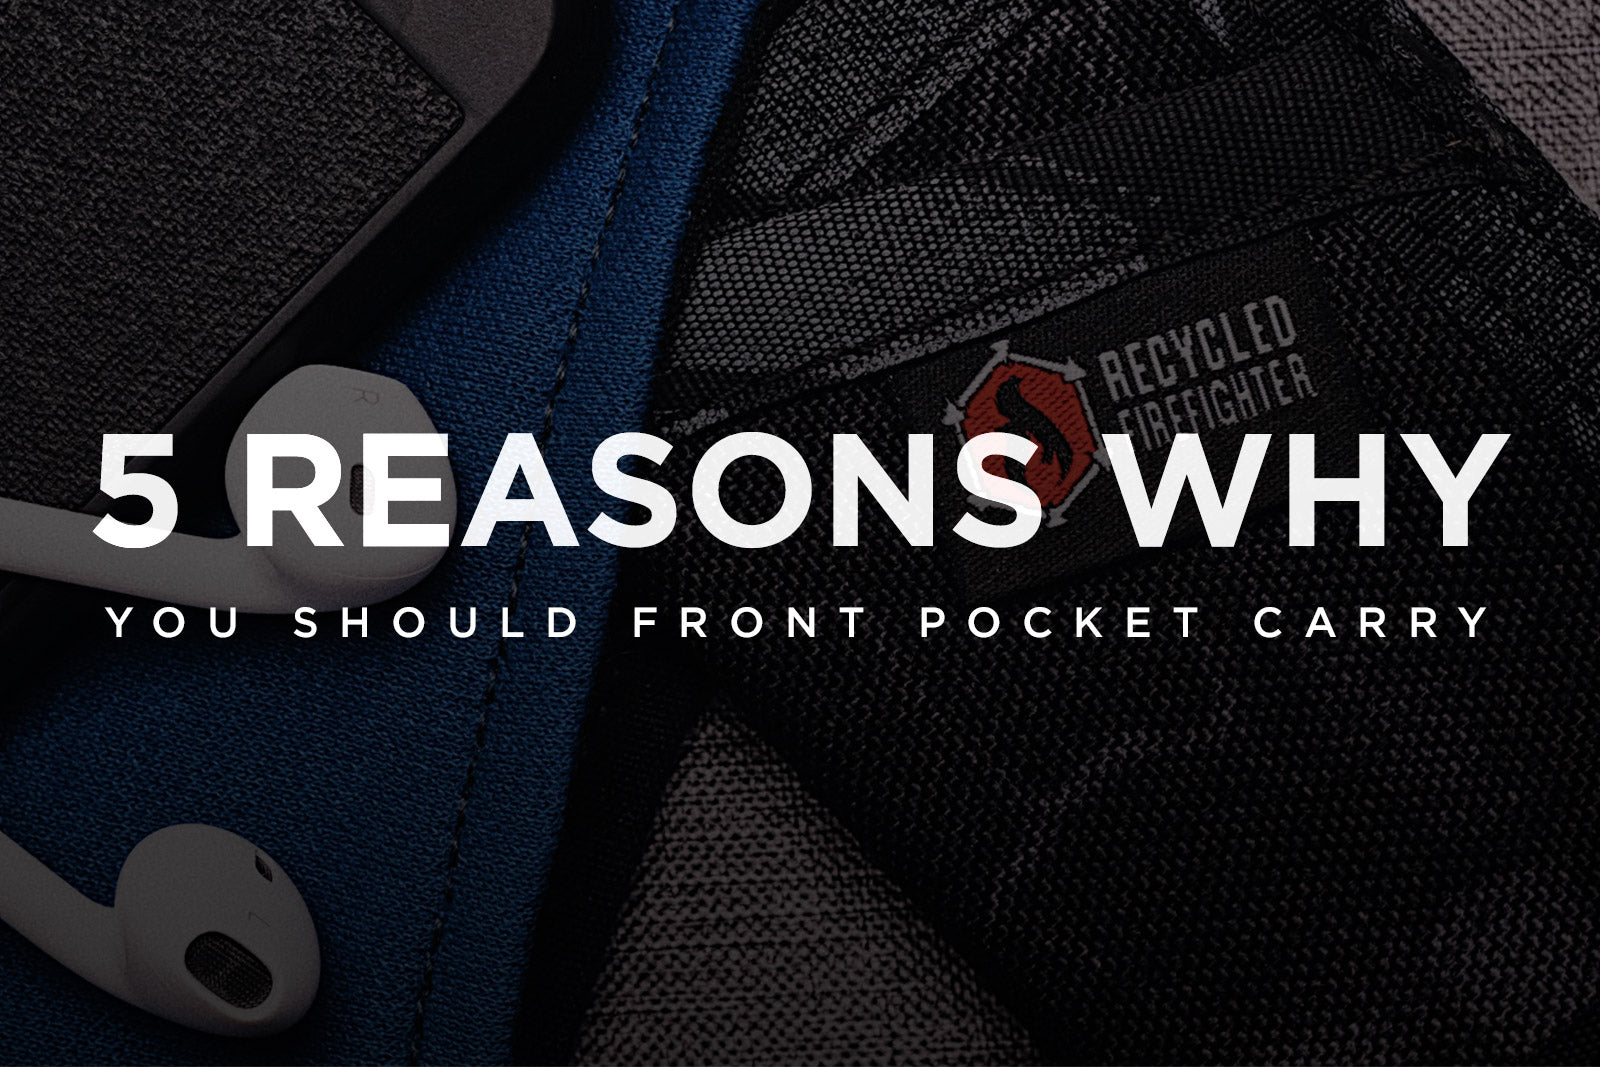 5 Reasons for Front Pocket Carry